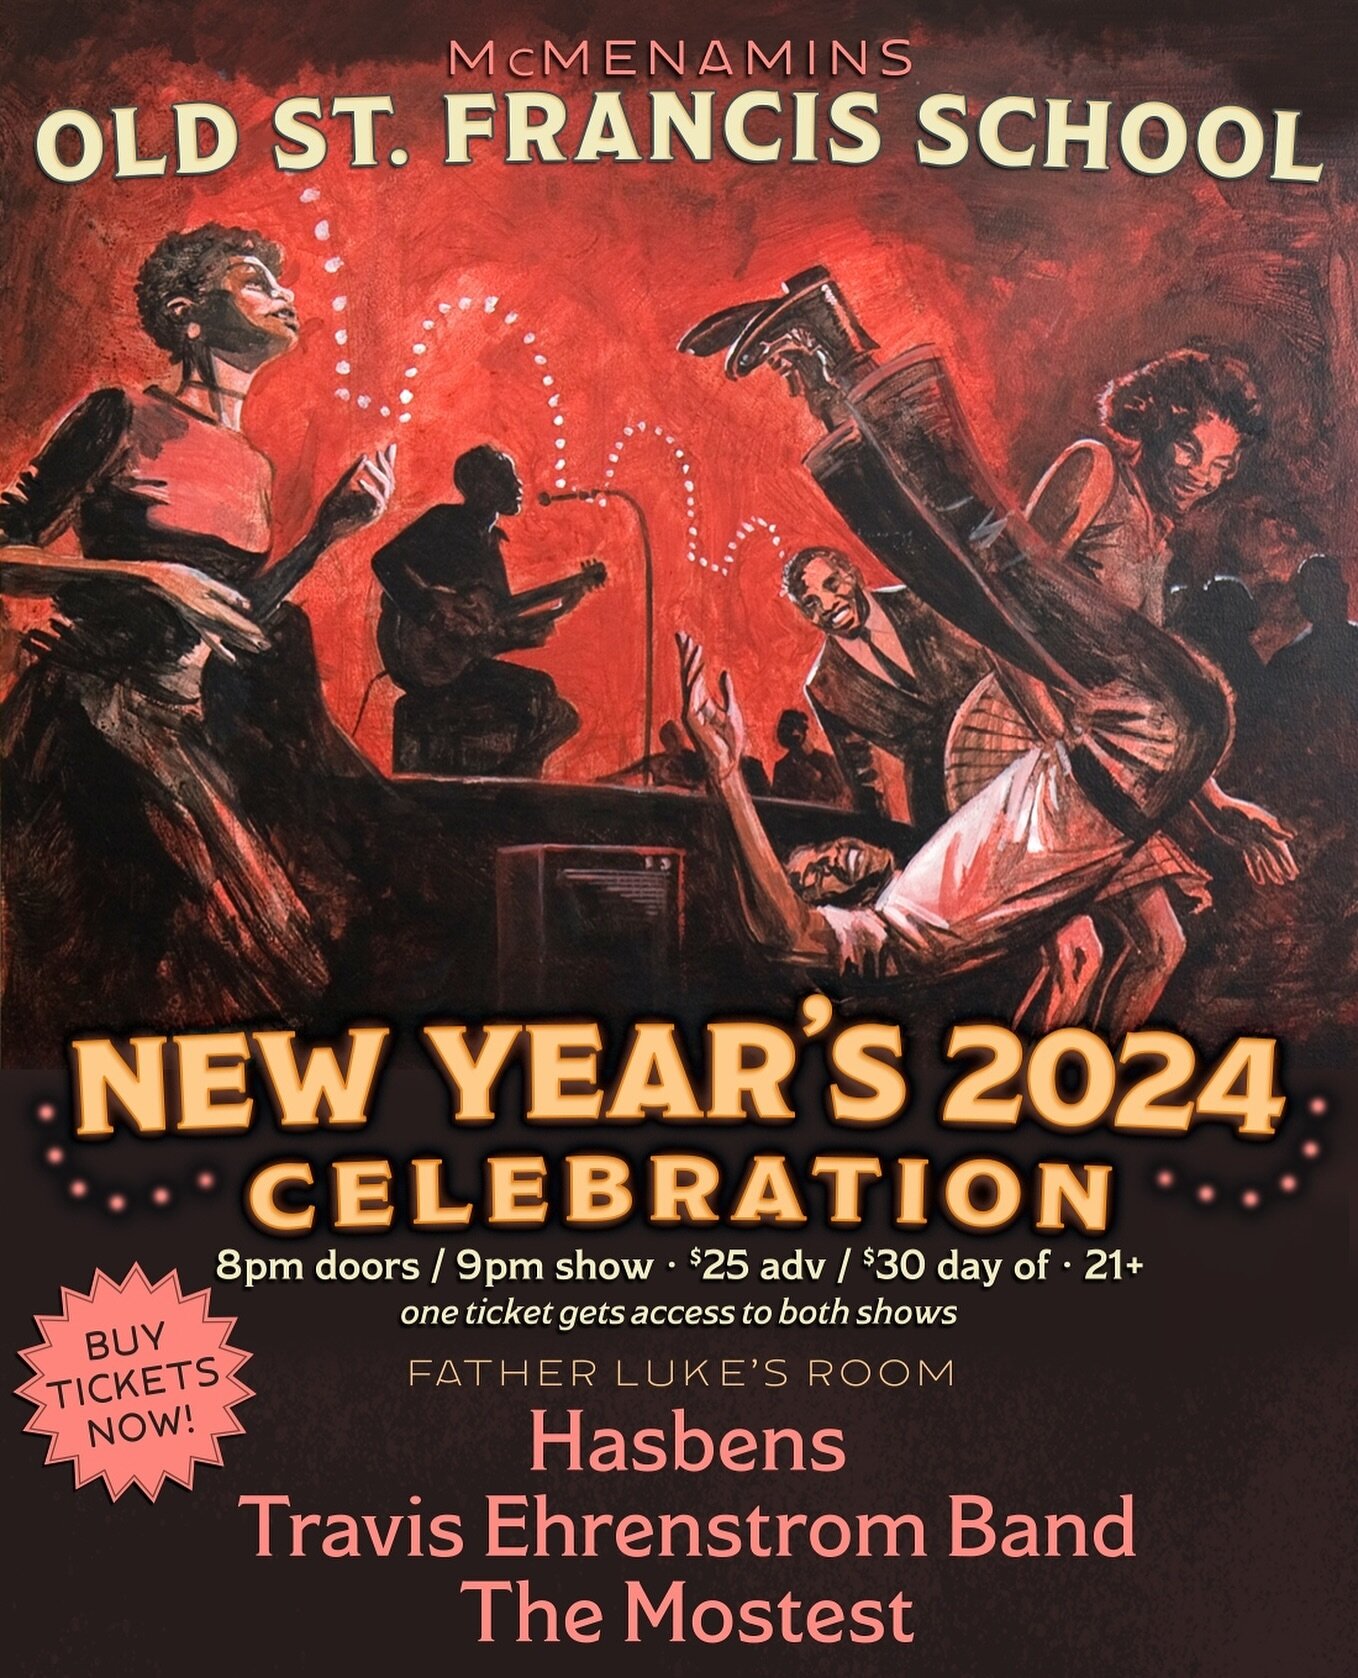 Join us for an unforgettable New Year&rsquo;s Eve at McMenamins Old St. Francis School! TEB is thrilled to be part of a musical lineup that will make for a truly special evening.

TEB, along with our friends @thehasbensband and @teleport_people will 